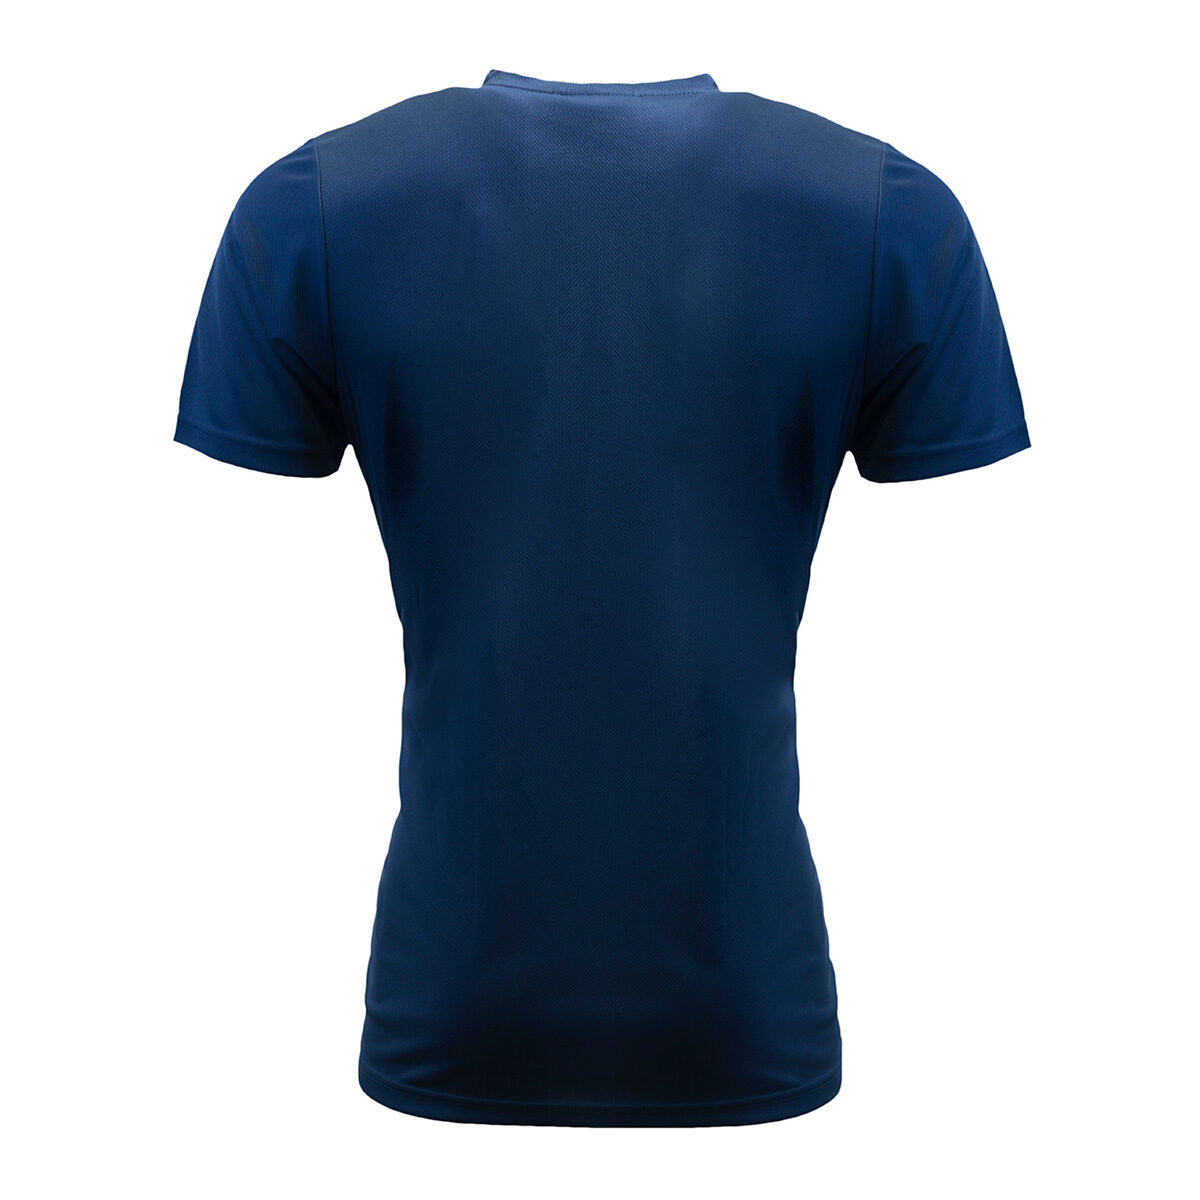 BRISTELL functional t-shirt without logo